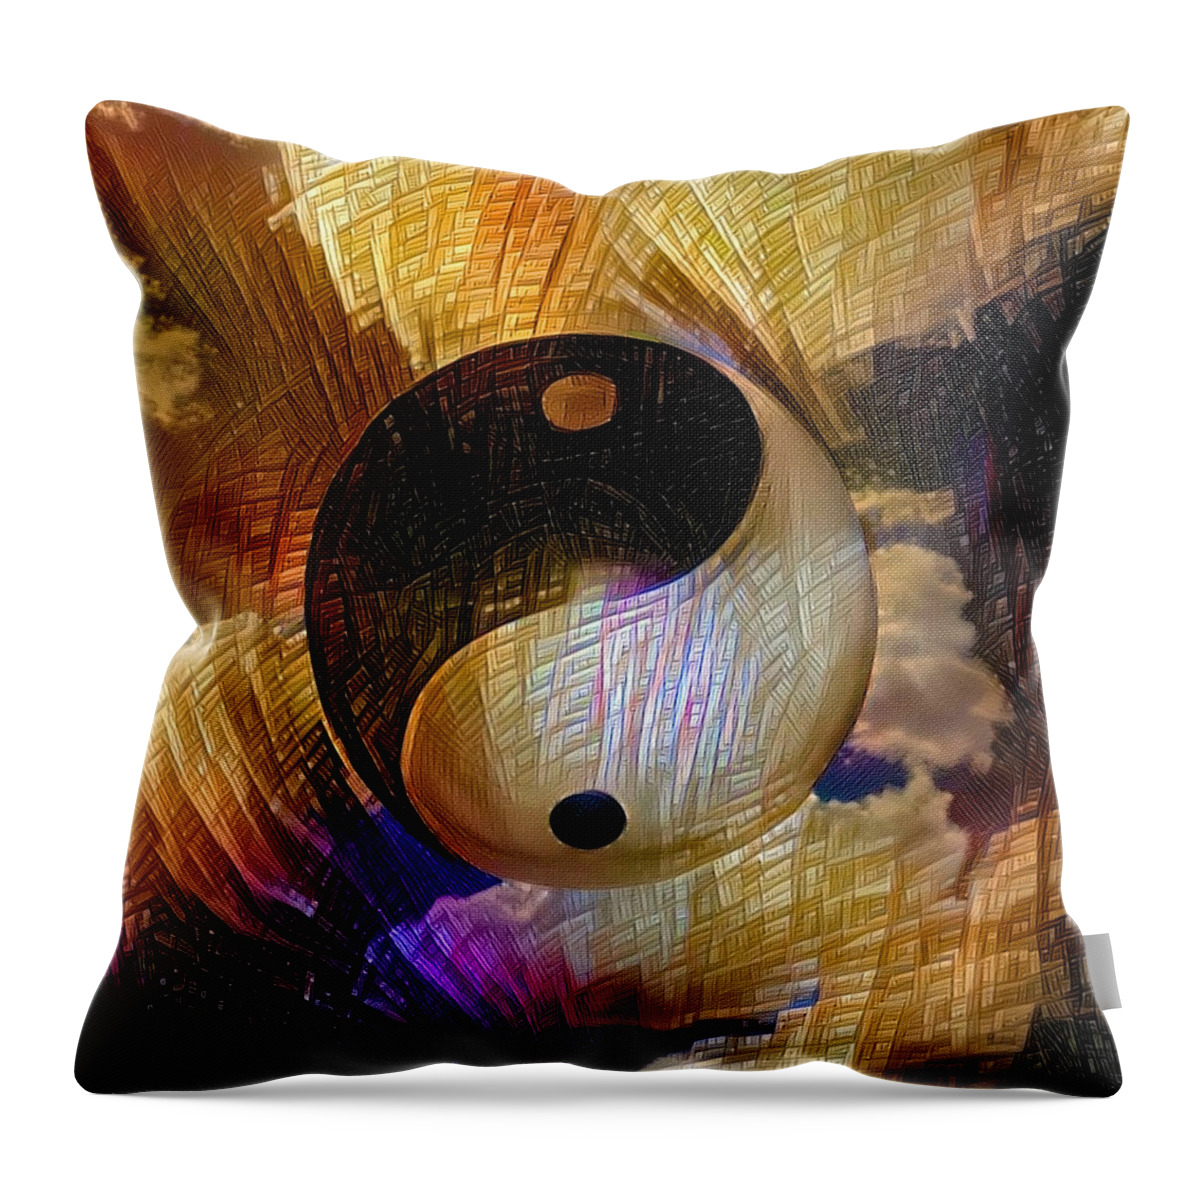 Abstract Throw Pillow featuring the digital art Yin Yang by Bruce Rolff